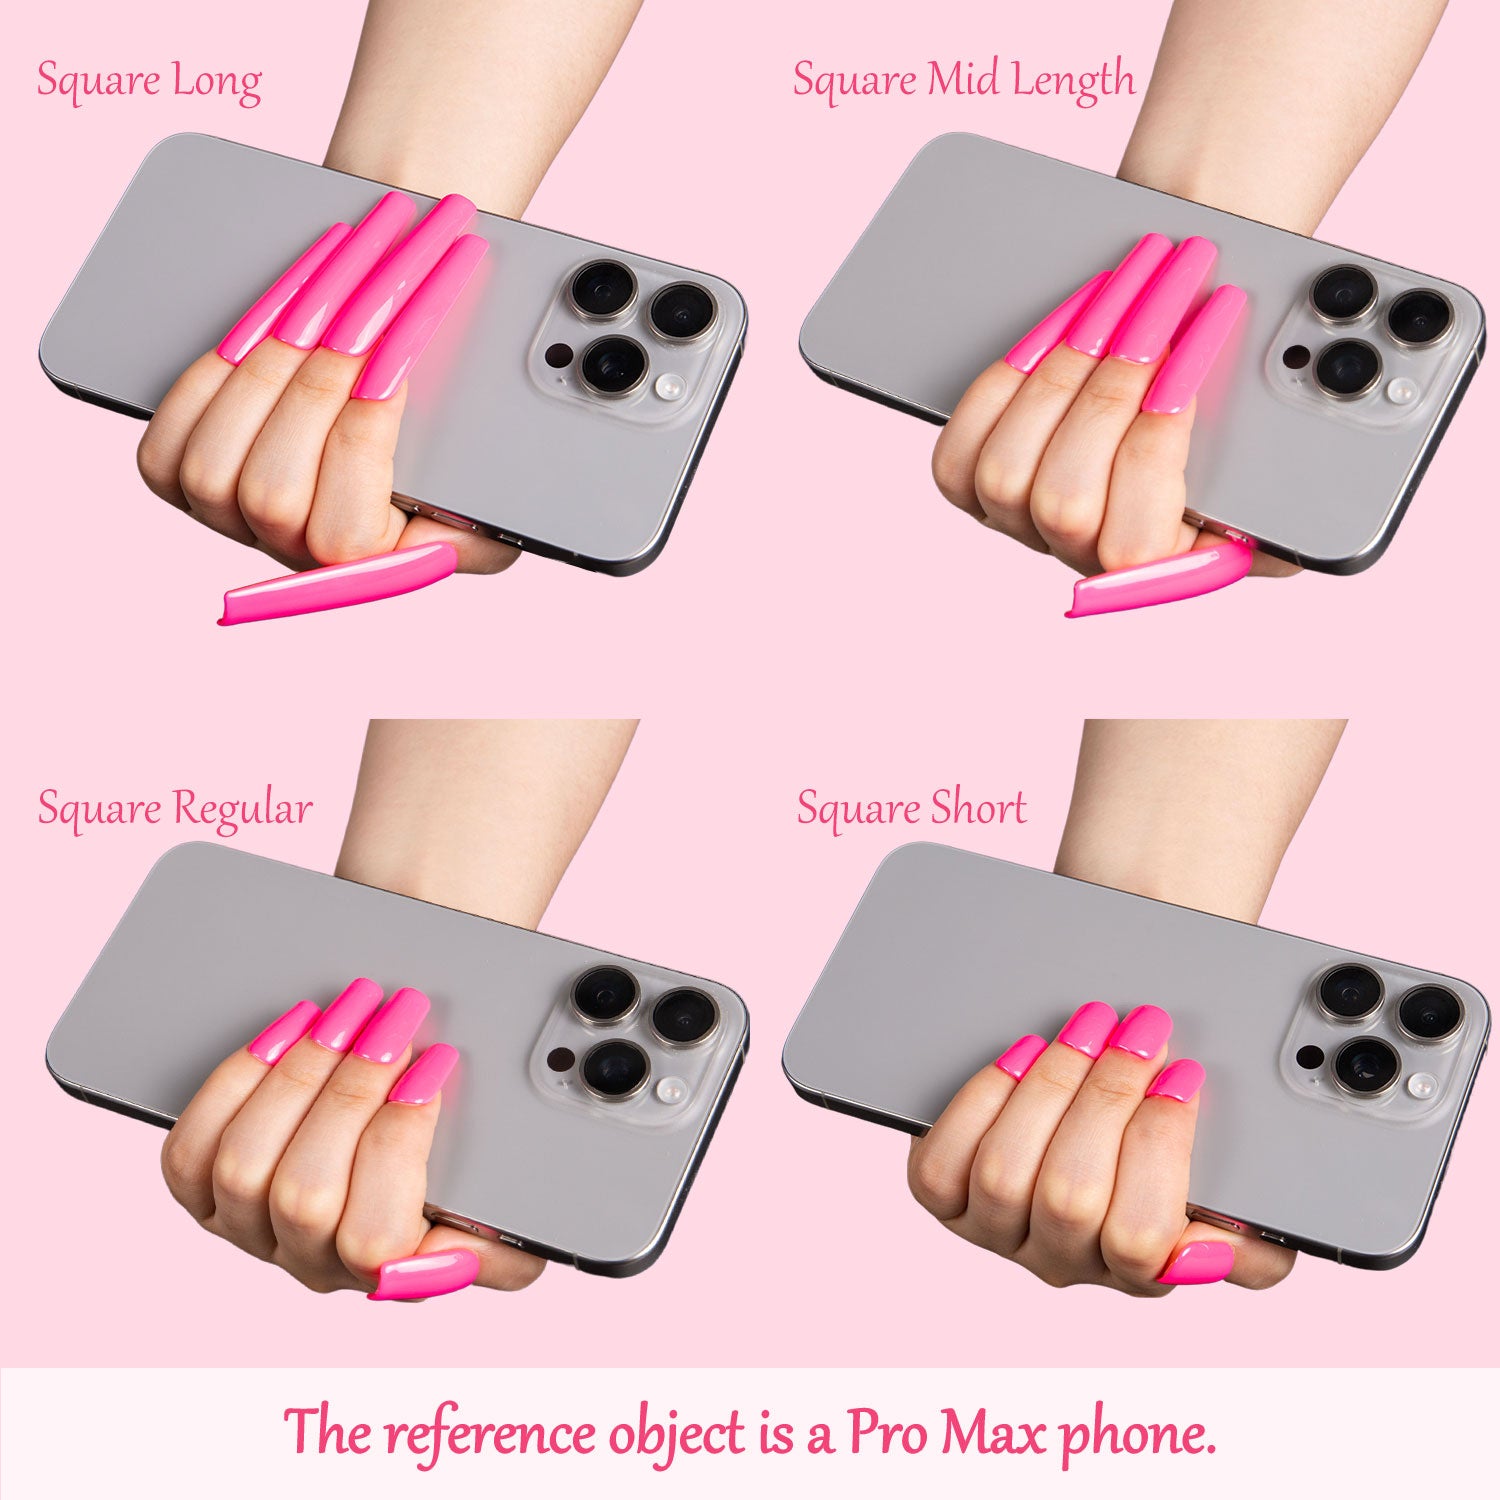 Different lengths of square-shaped pink press-on nails shown holding a Pro Max phone, including long, mid-length, regular, and short nail options.